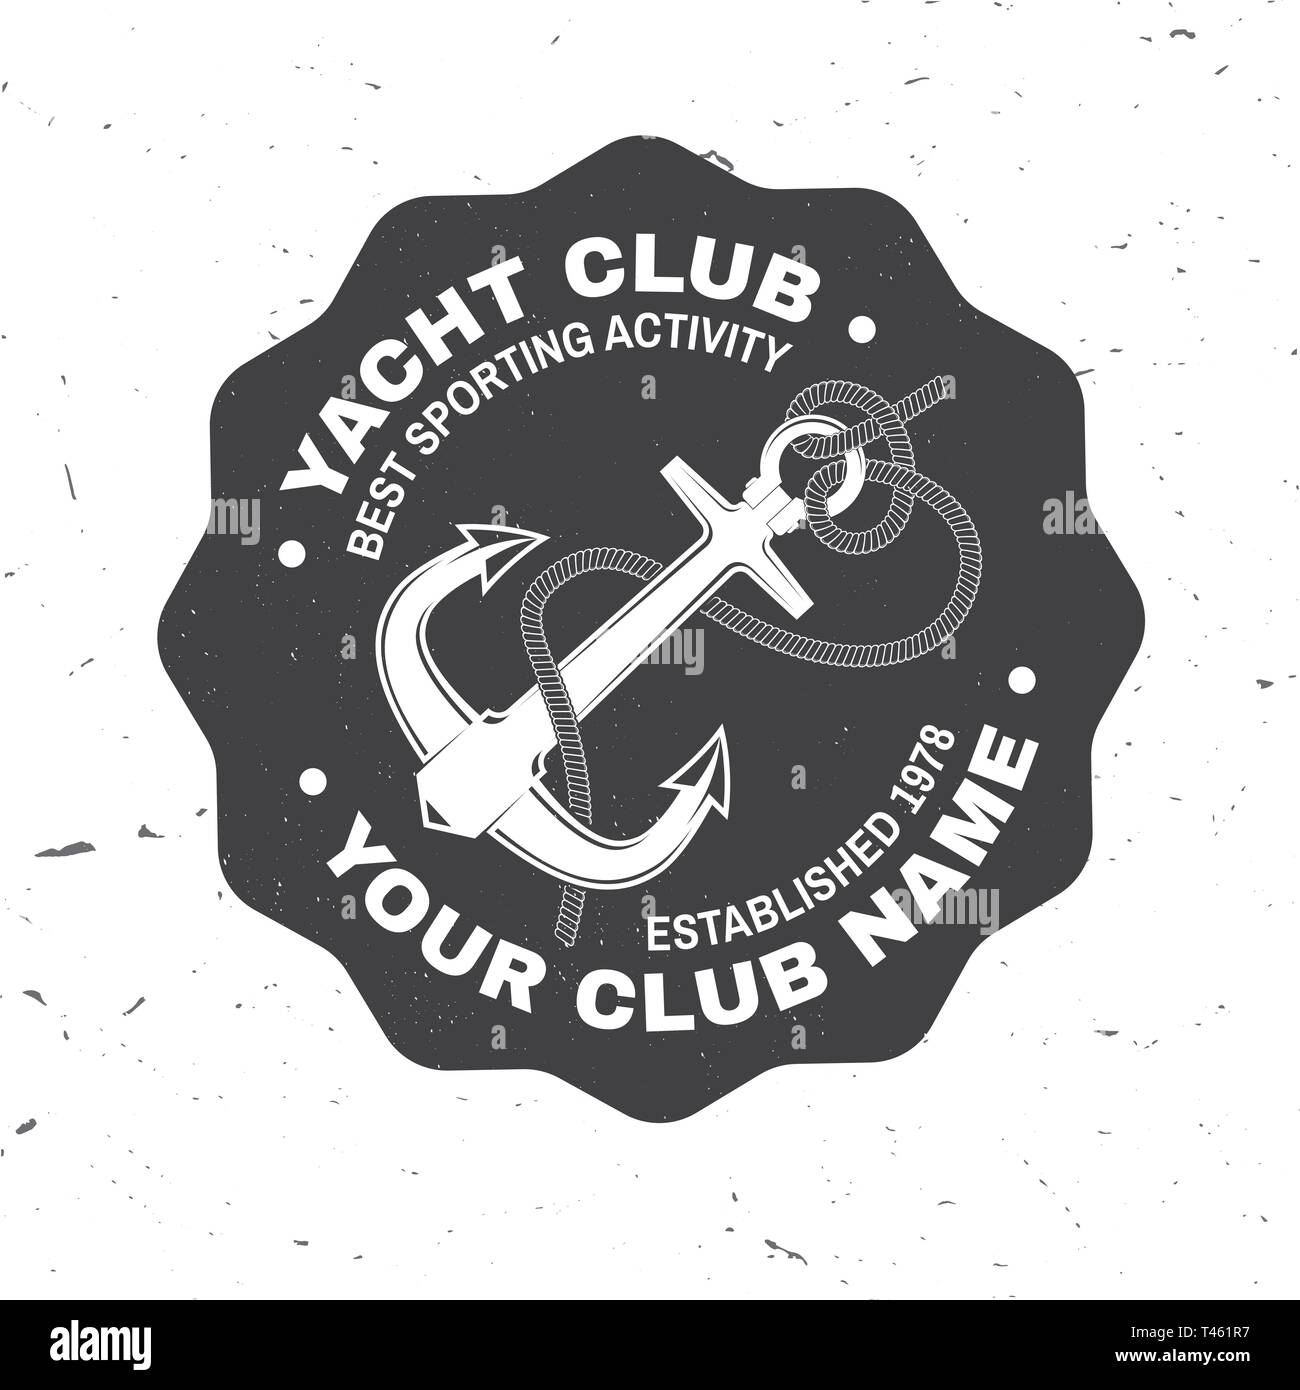 Yacht club badge. Vector illustration. Concept for shirt, print, stamp or tee. Vintage typography design with black sea anchor and rope knot silhouette. Stock Vector